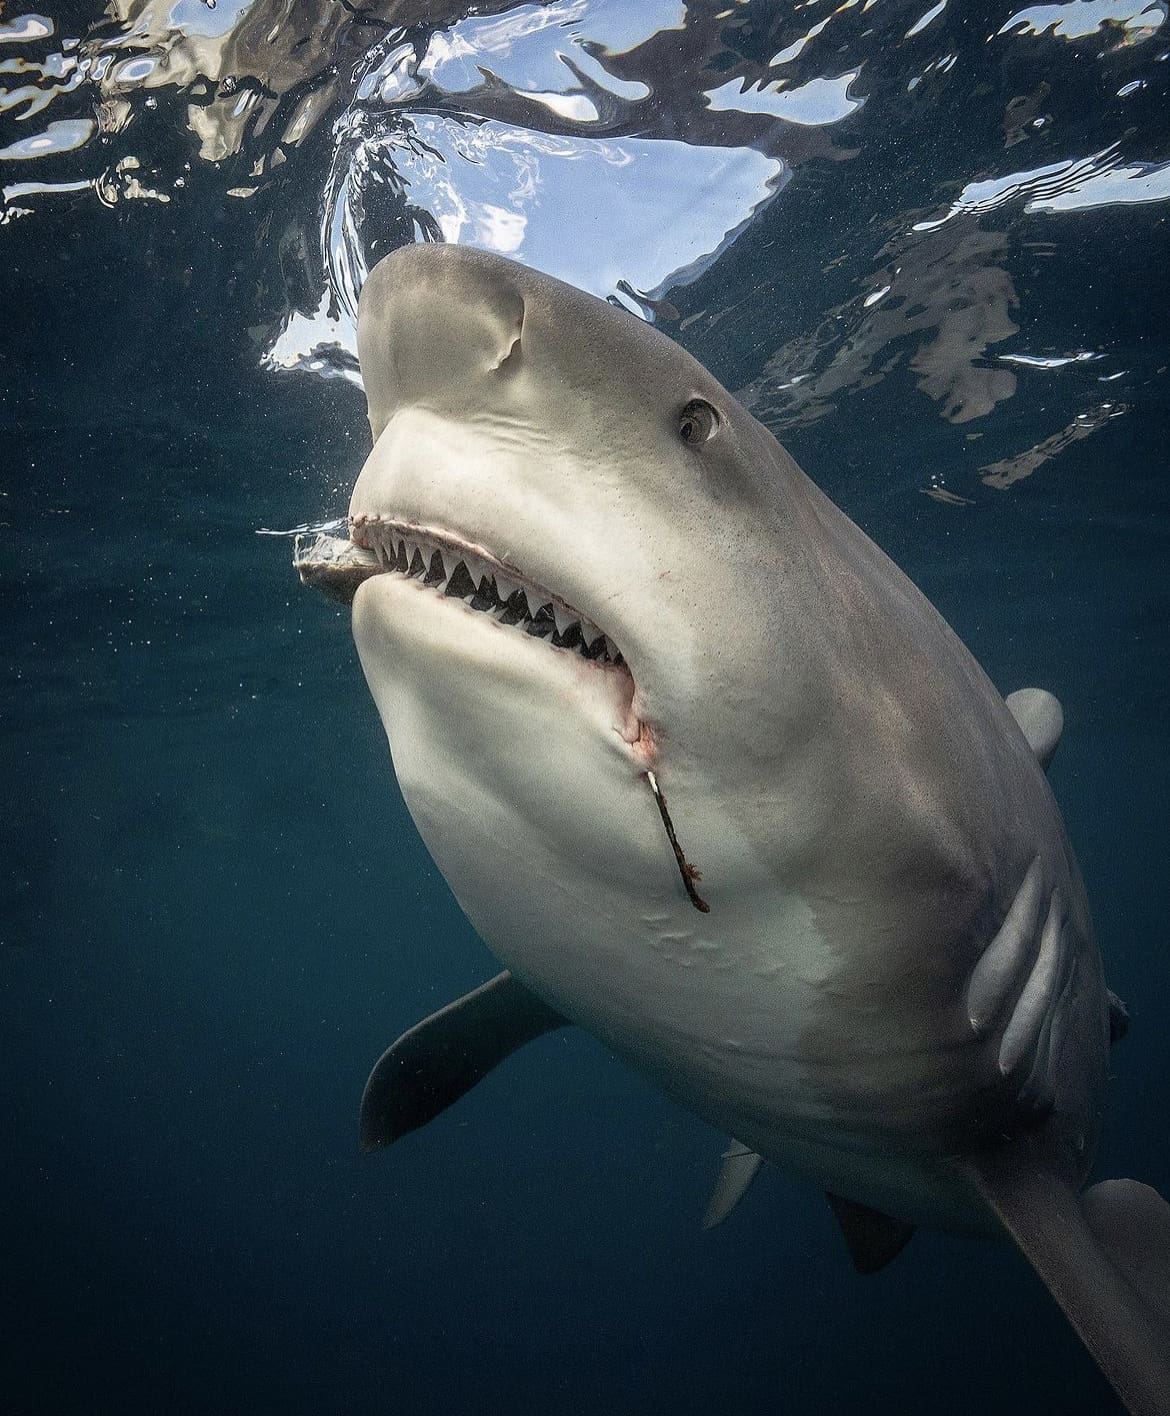 Bull shark with hook in its mouth